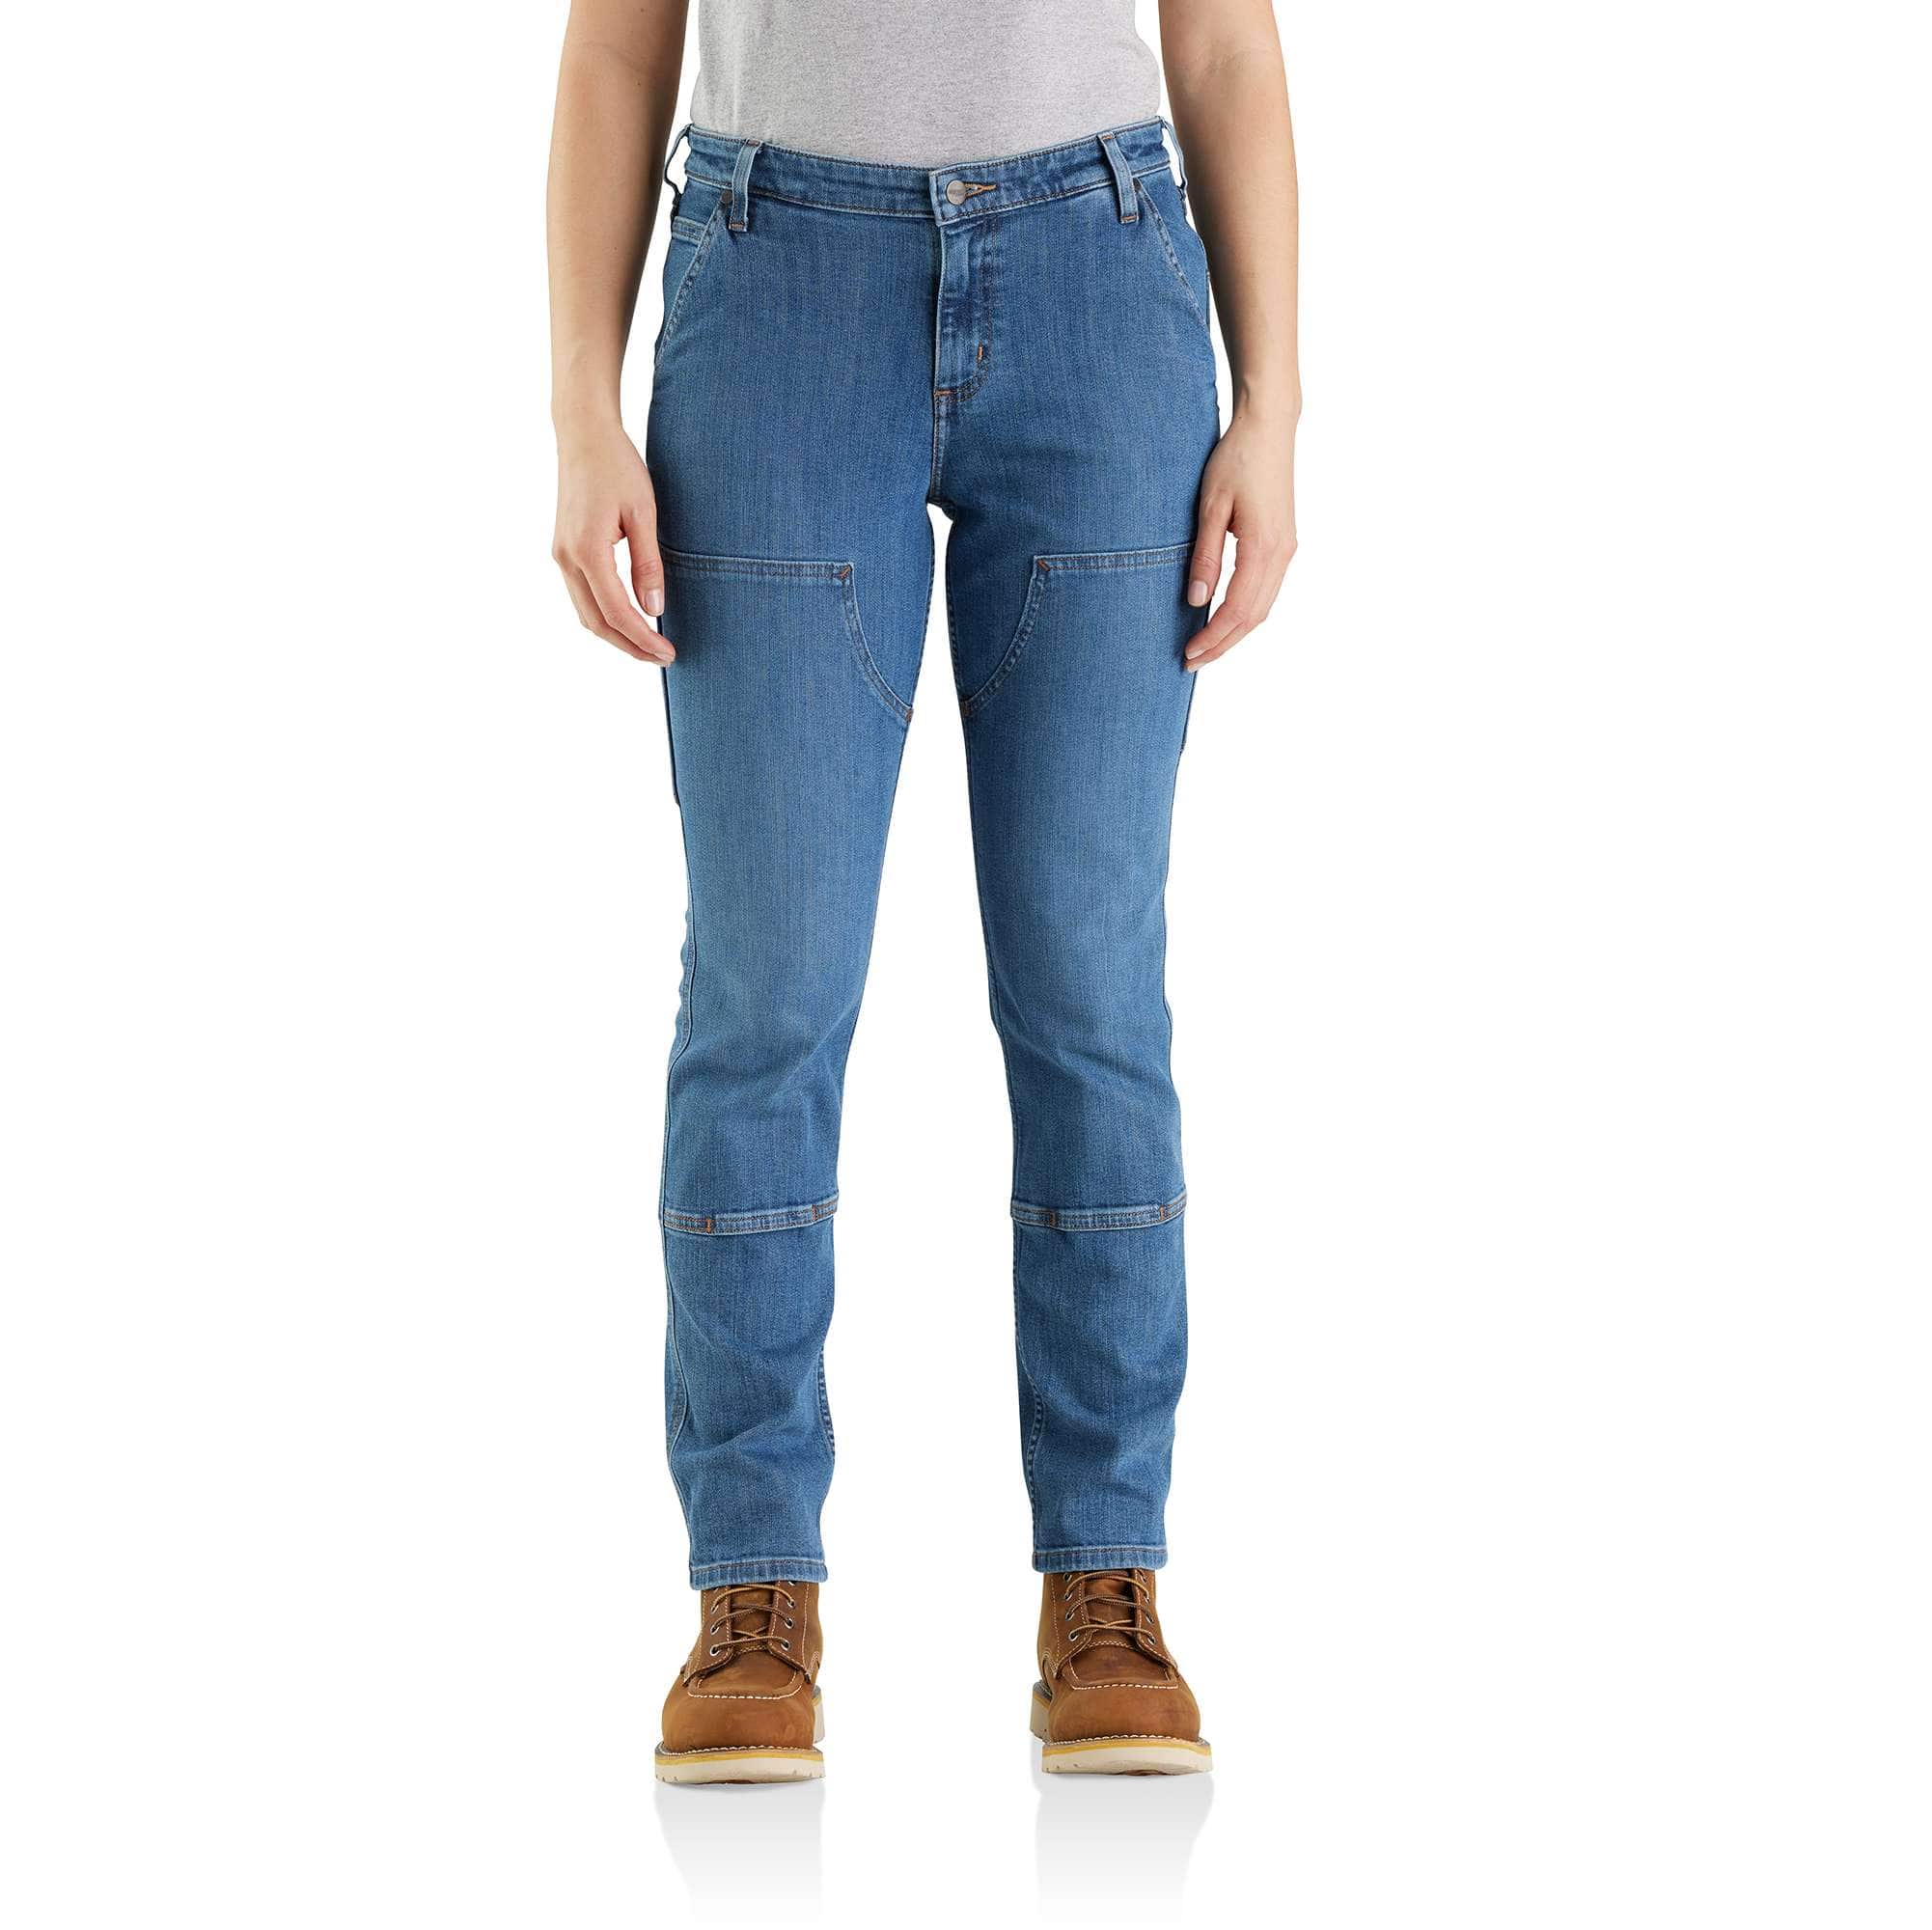 Women's Double-Knee Jean - Relaxed Fit - Rugged Flex®